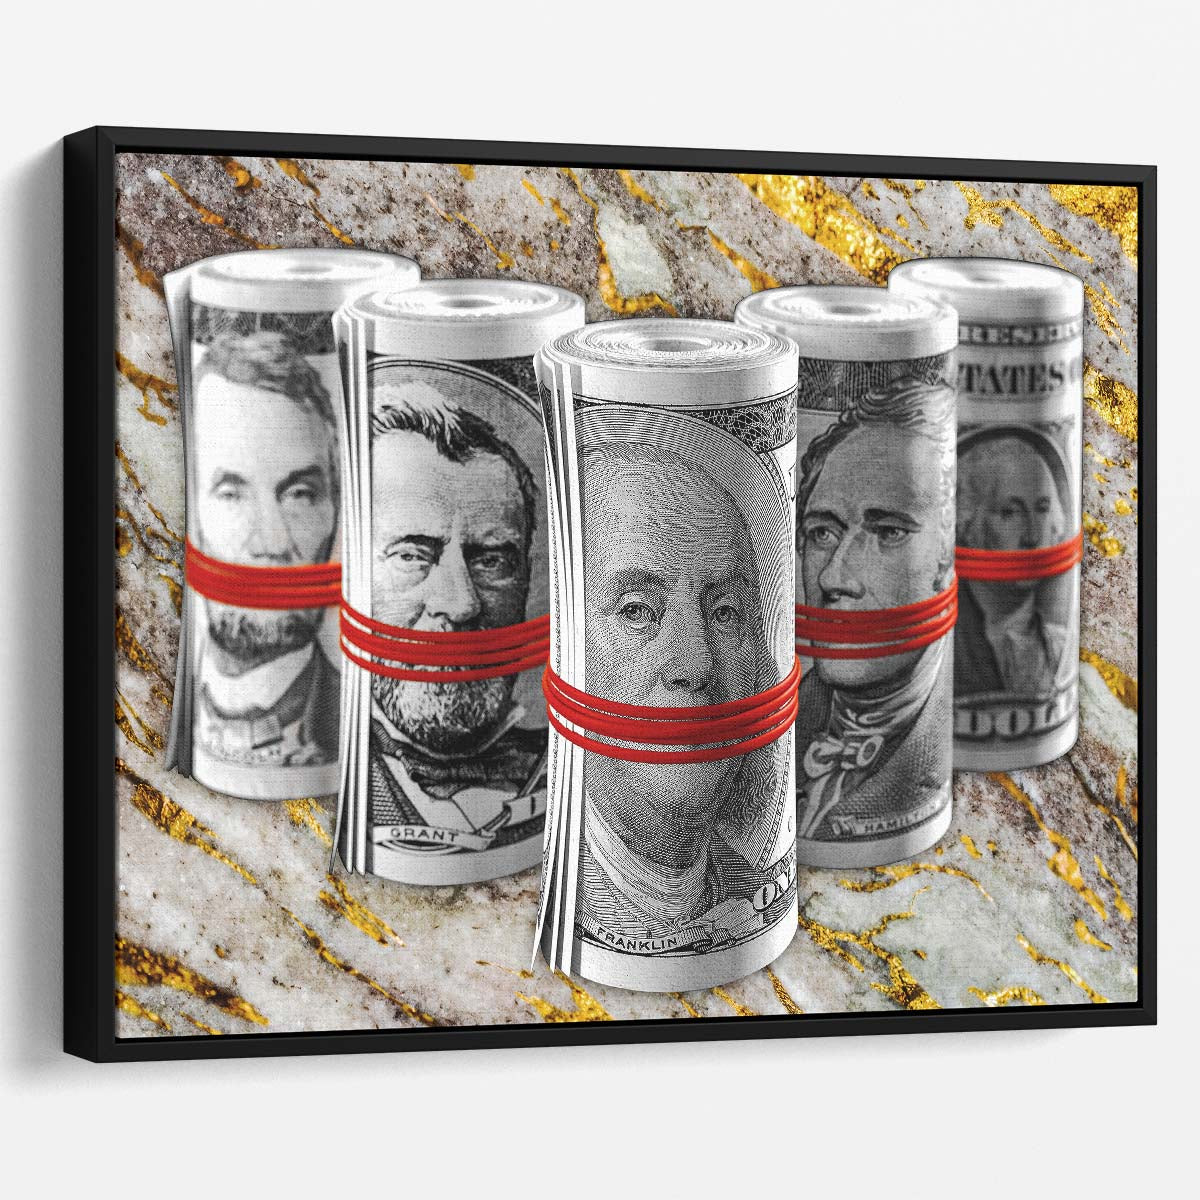 Presidents for Ransom American Dollar Roll Wall Art by Luxuriance Designs. Made in USA.